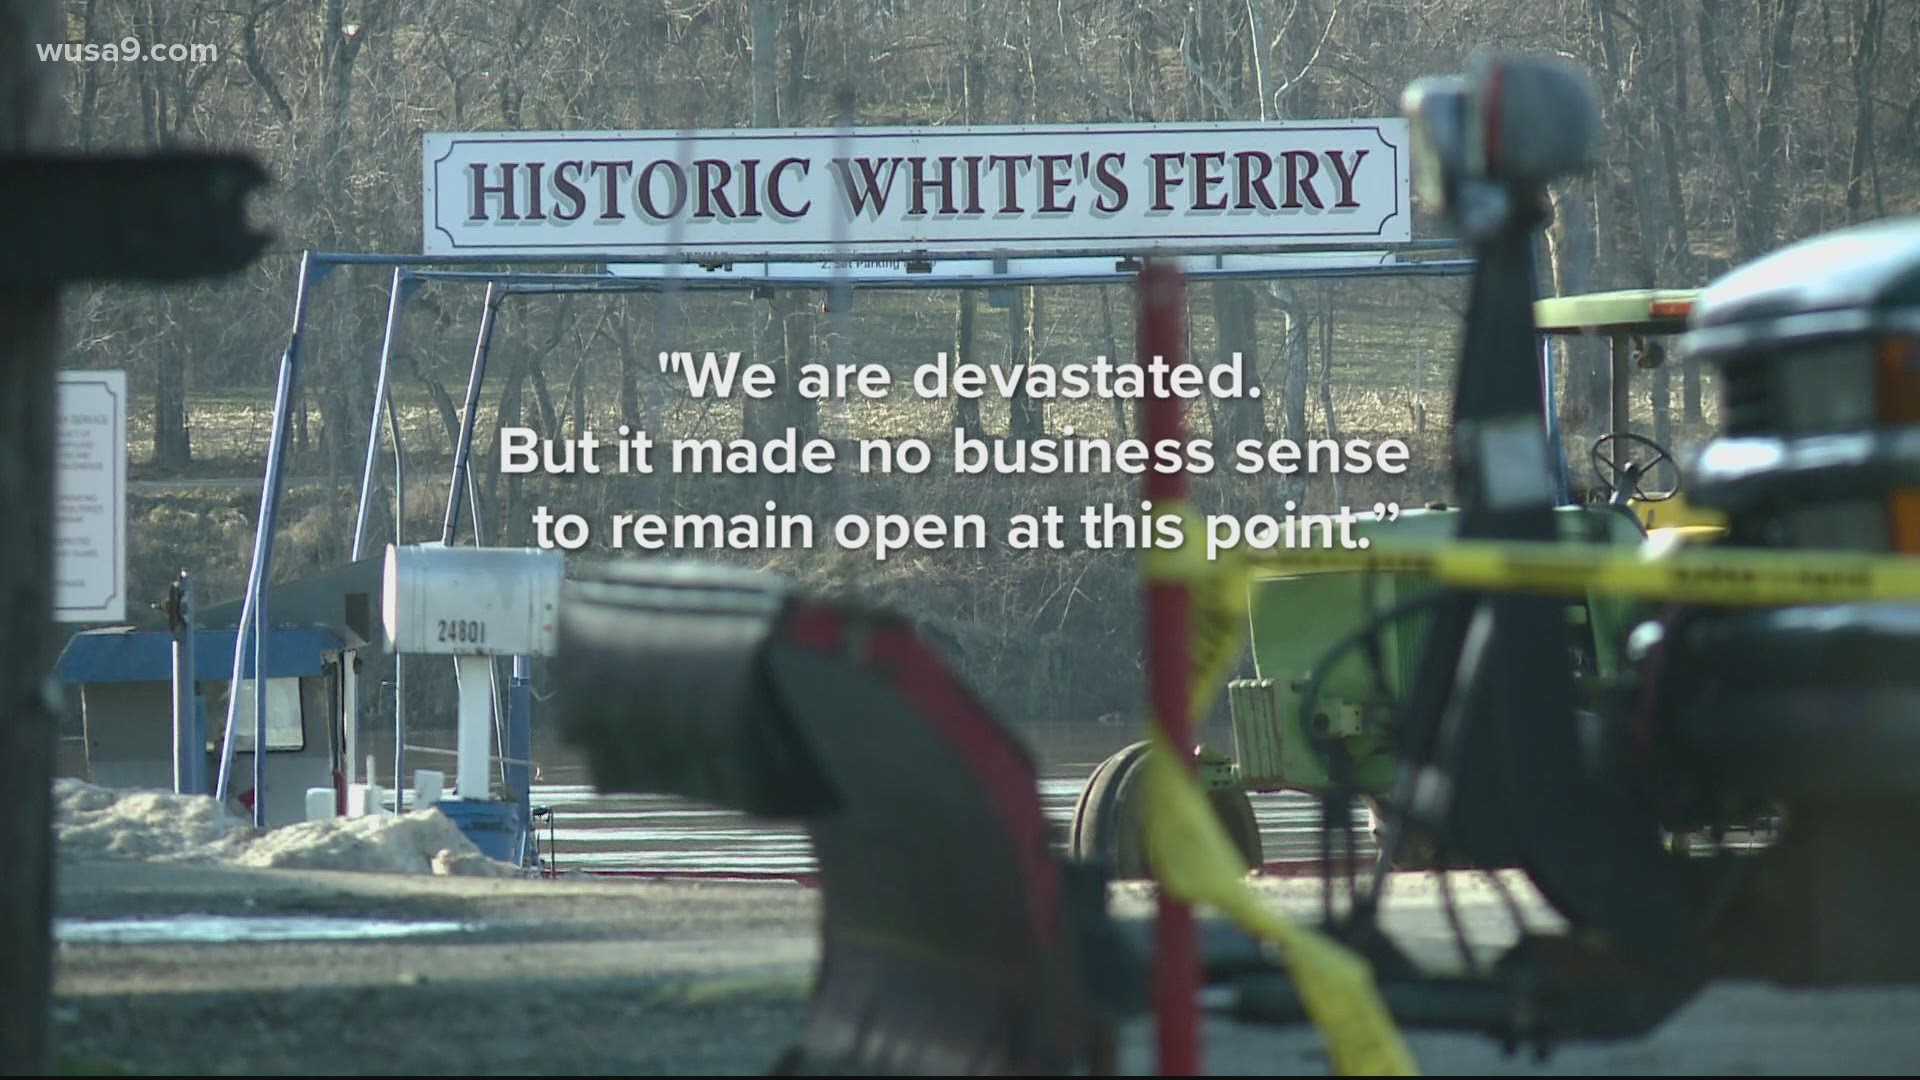 The ferry, which connects Loudoun County with Montgomery County, Maryland, is the last working ferry of 100 ferries that used to operate on the Potomac River.